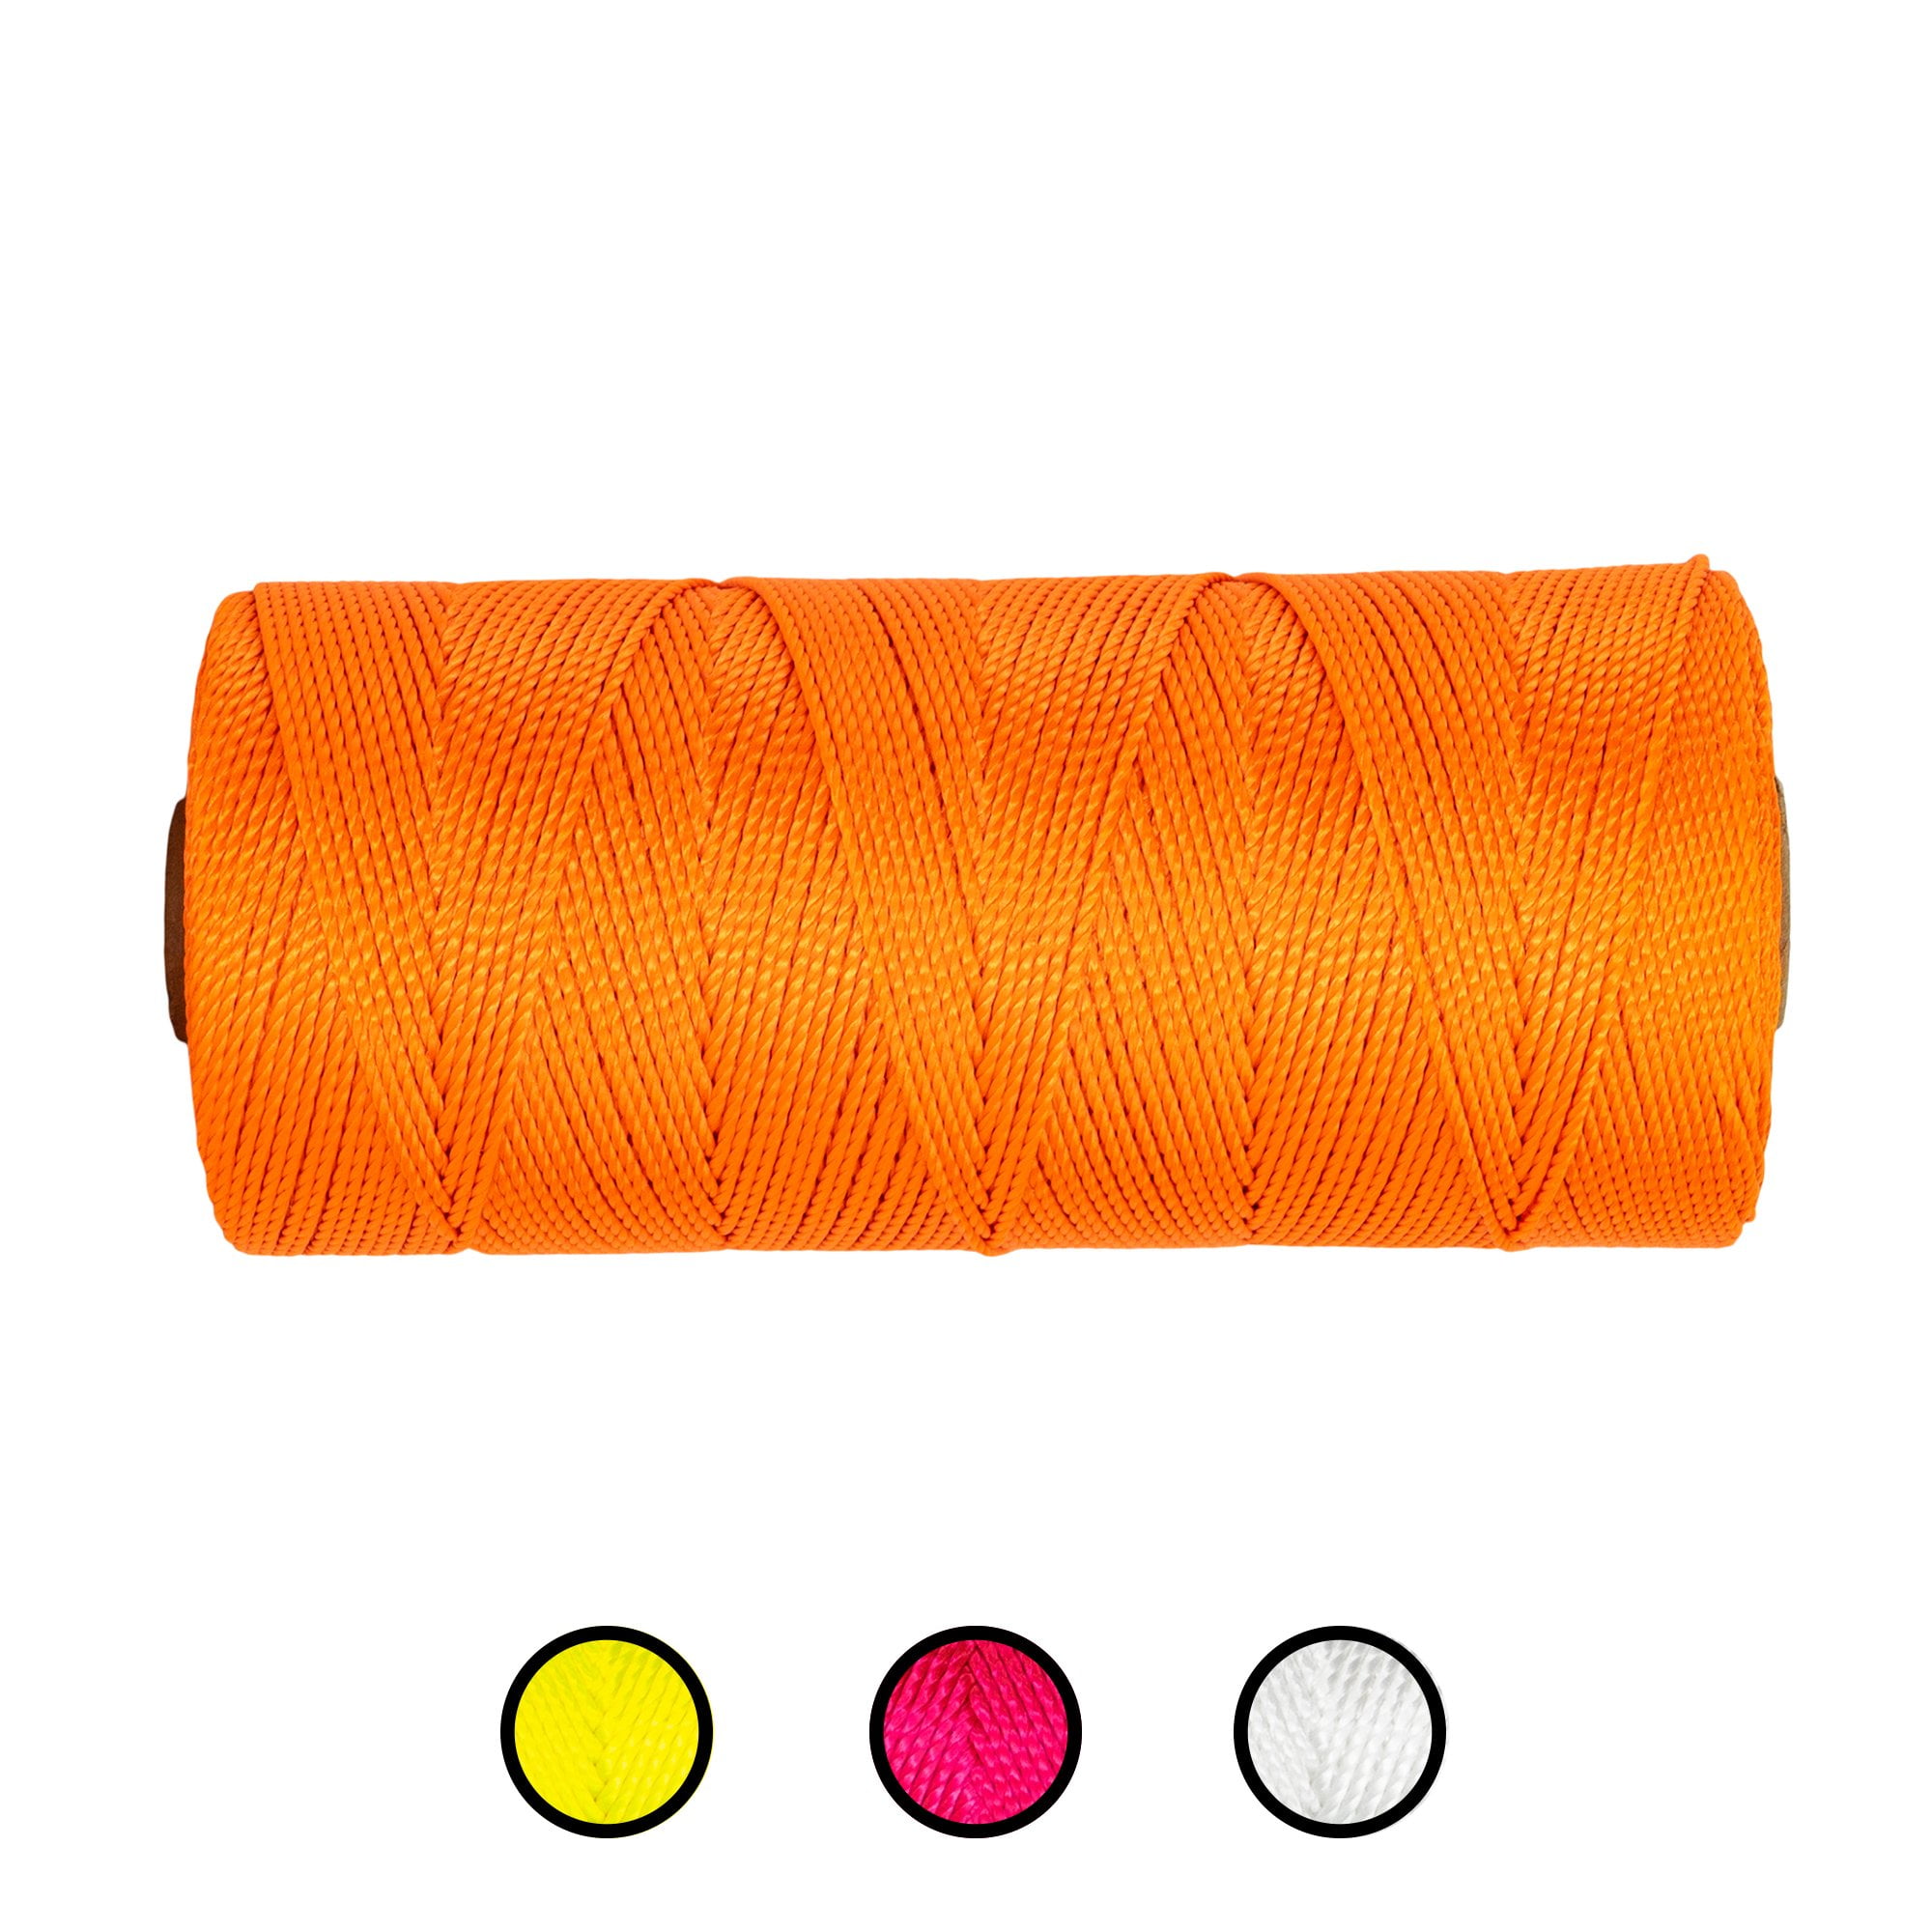 Wellington Puritan 10482 Twisted Nylon Twine/Rope Multi-Purpose Mason Line Many uses Ideal For Boating Building and Crafts 193334 